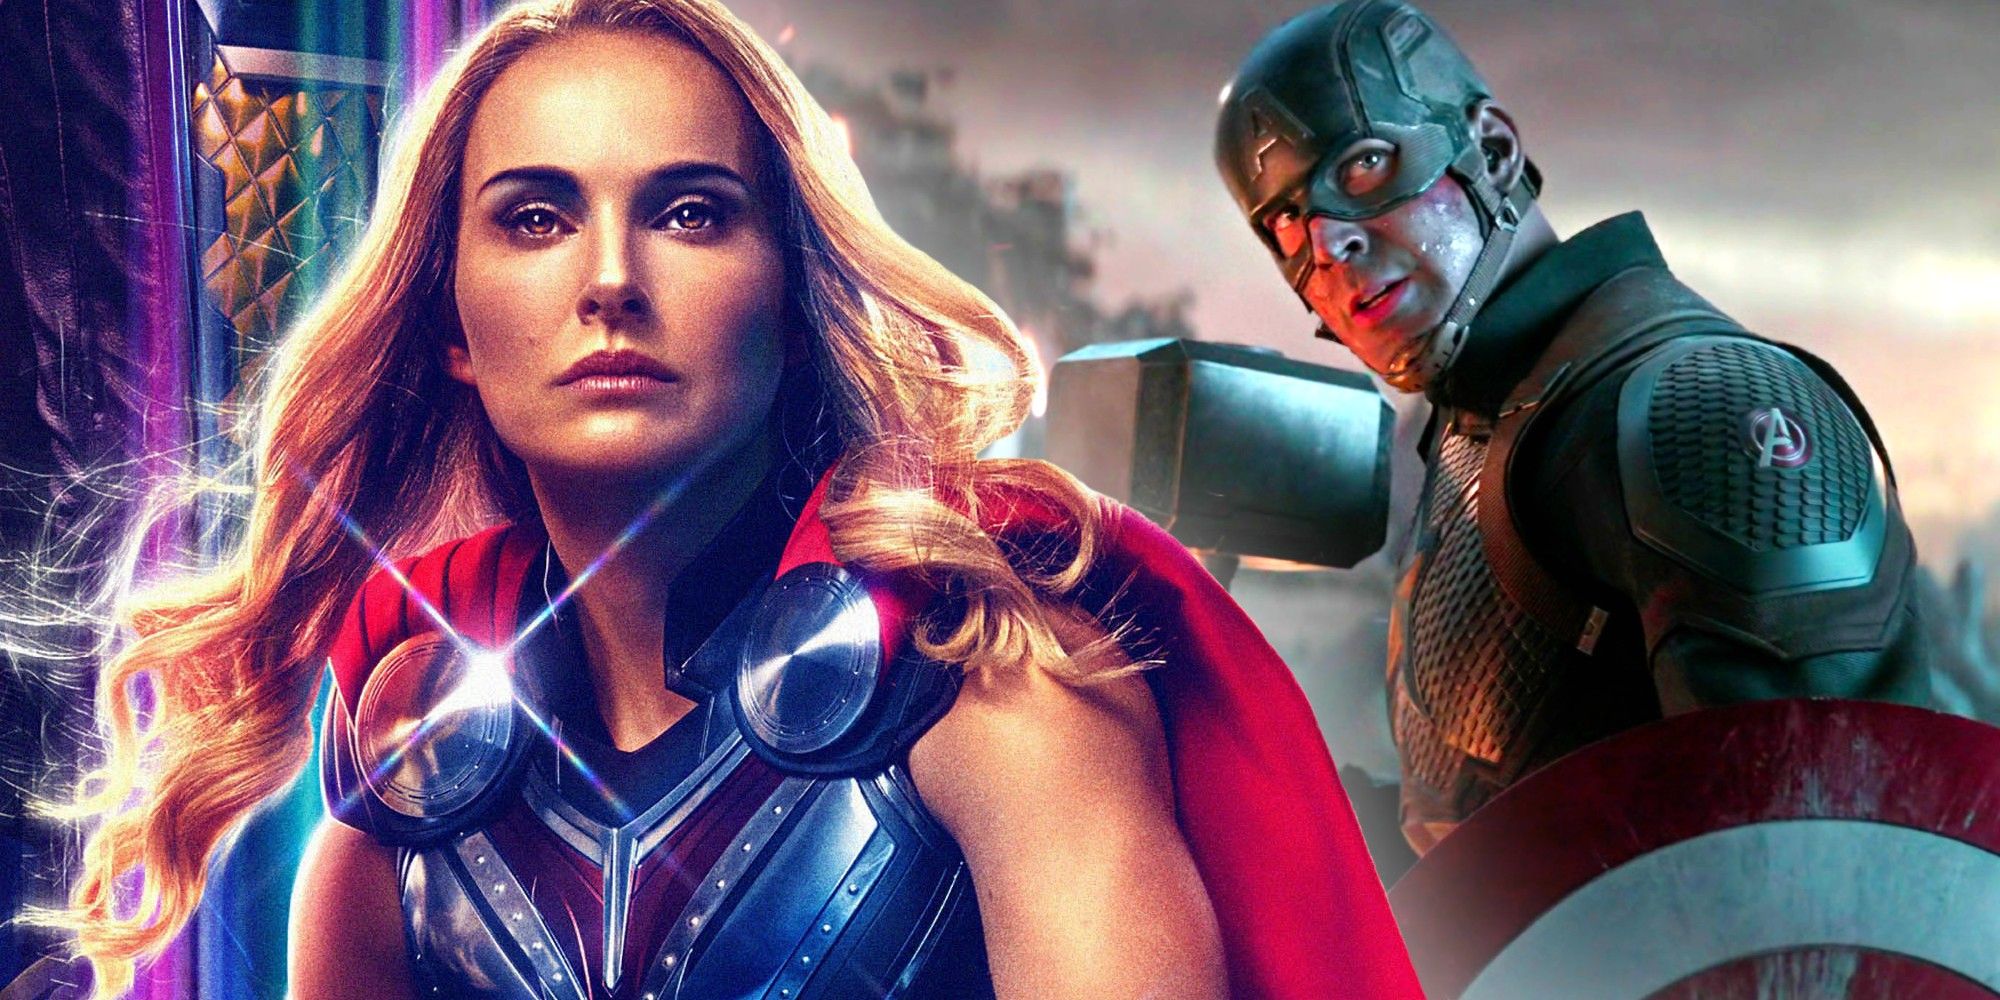 Jane Foster Mighty Thor with Captain America wielding Mjolnir in Avengers Endgame